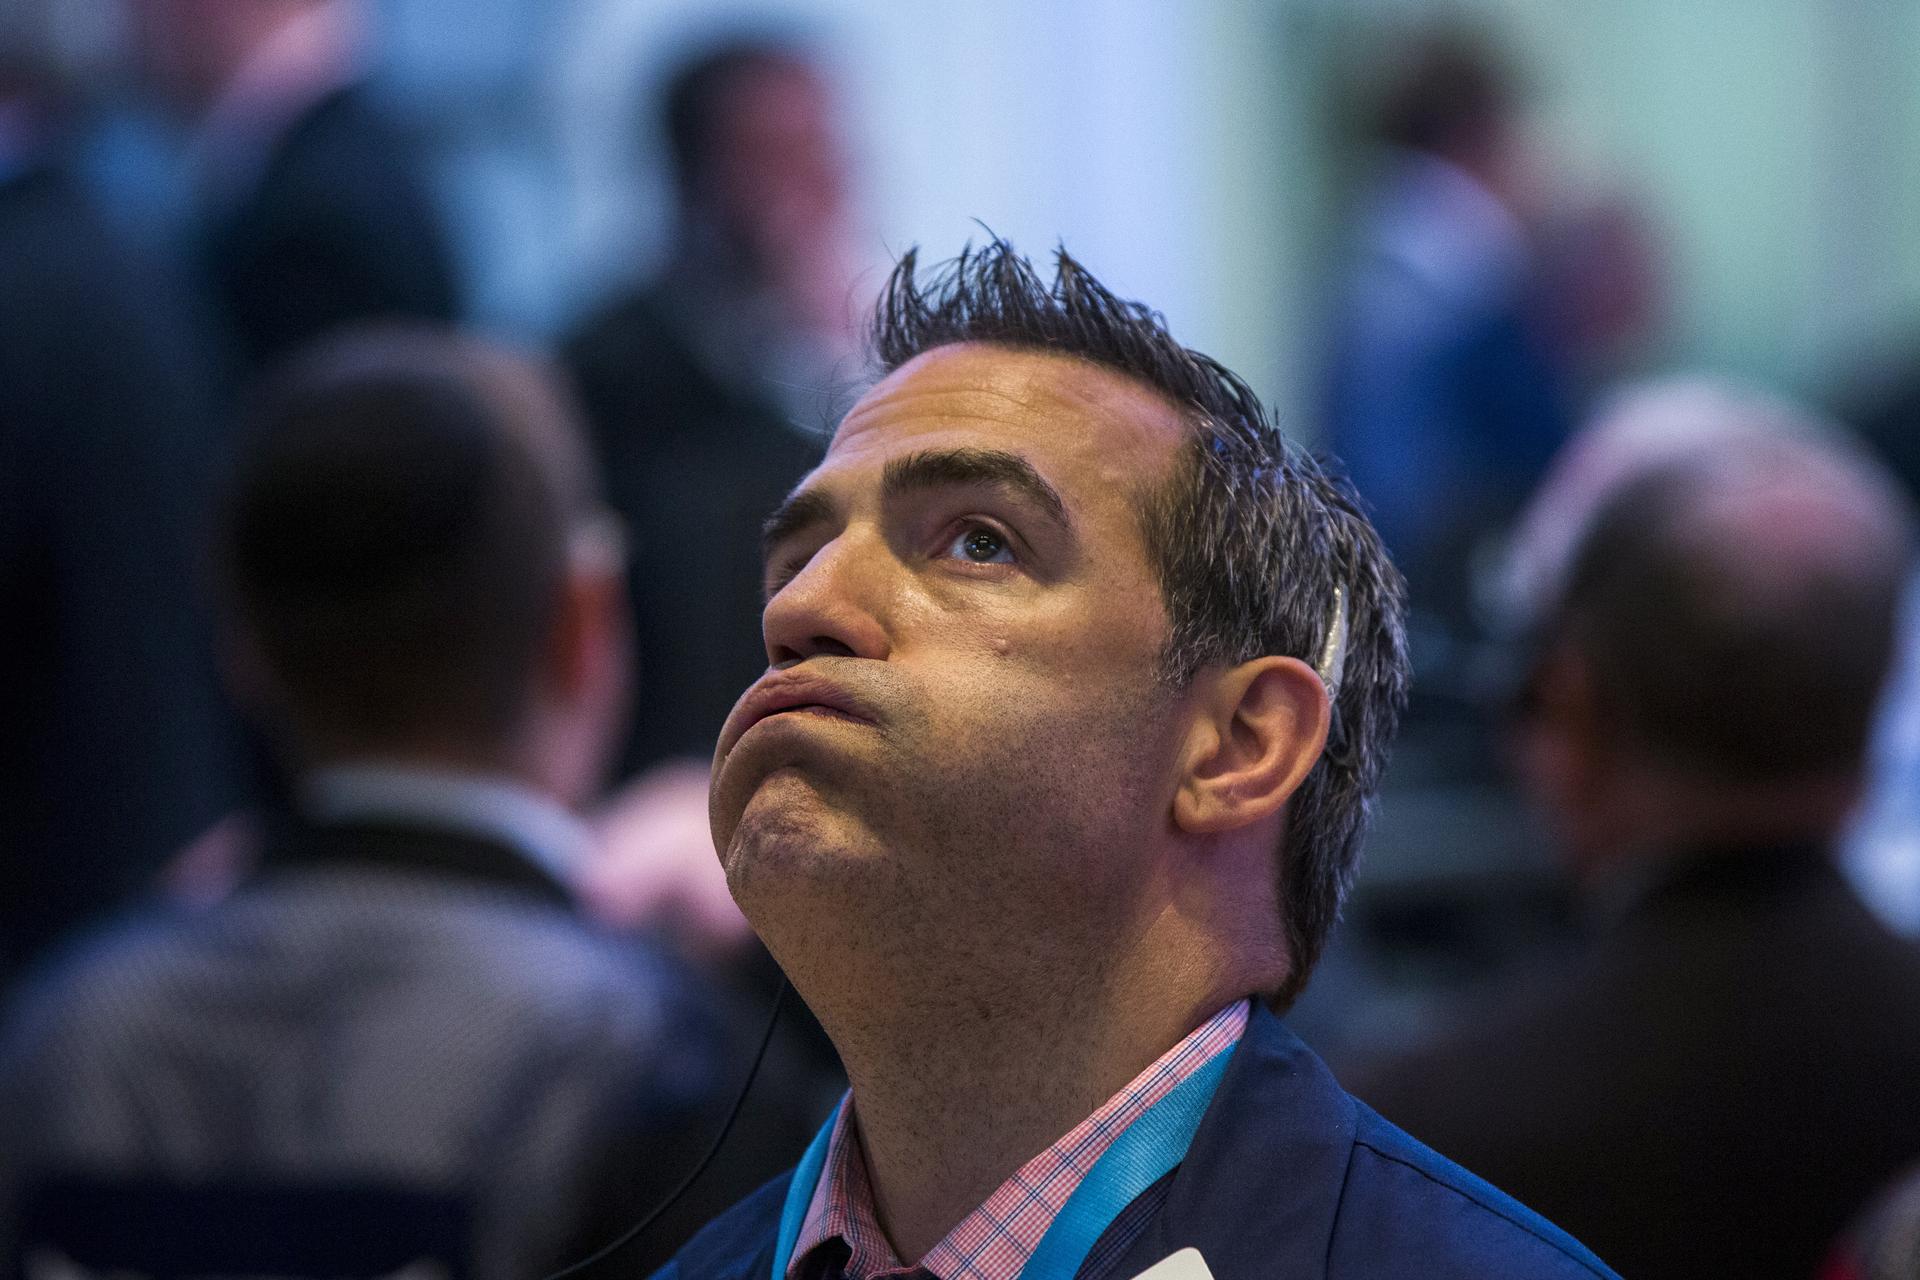 A trader waits for the NYSE to come back online